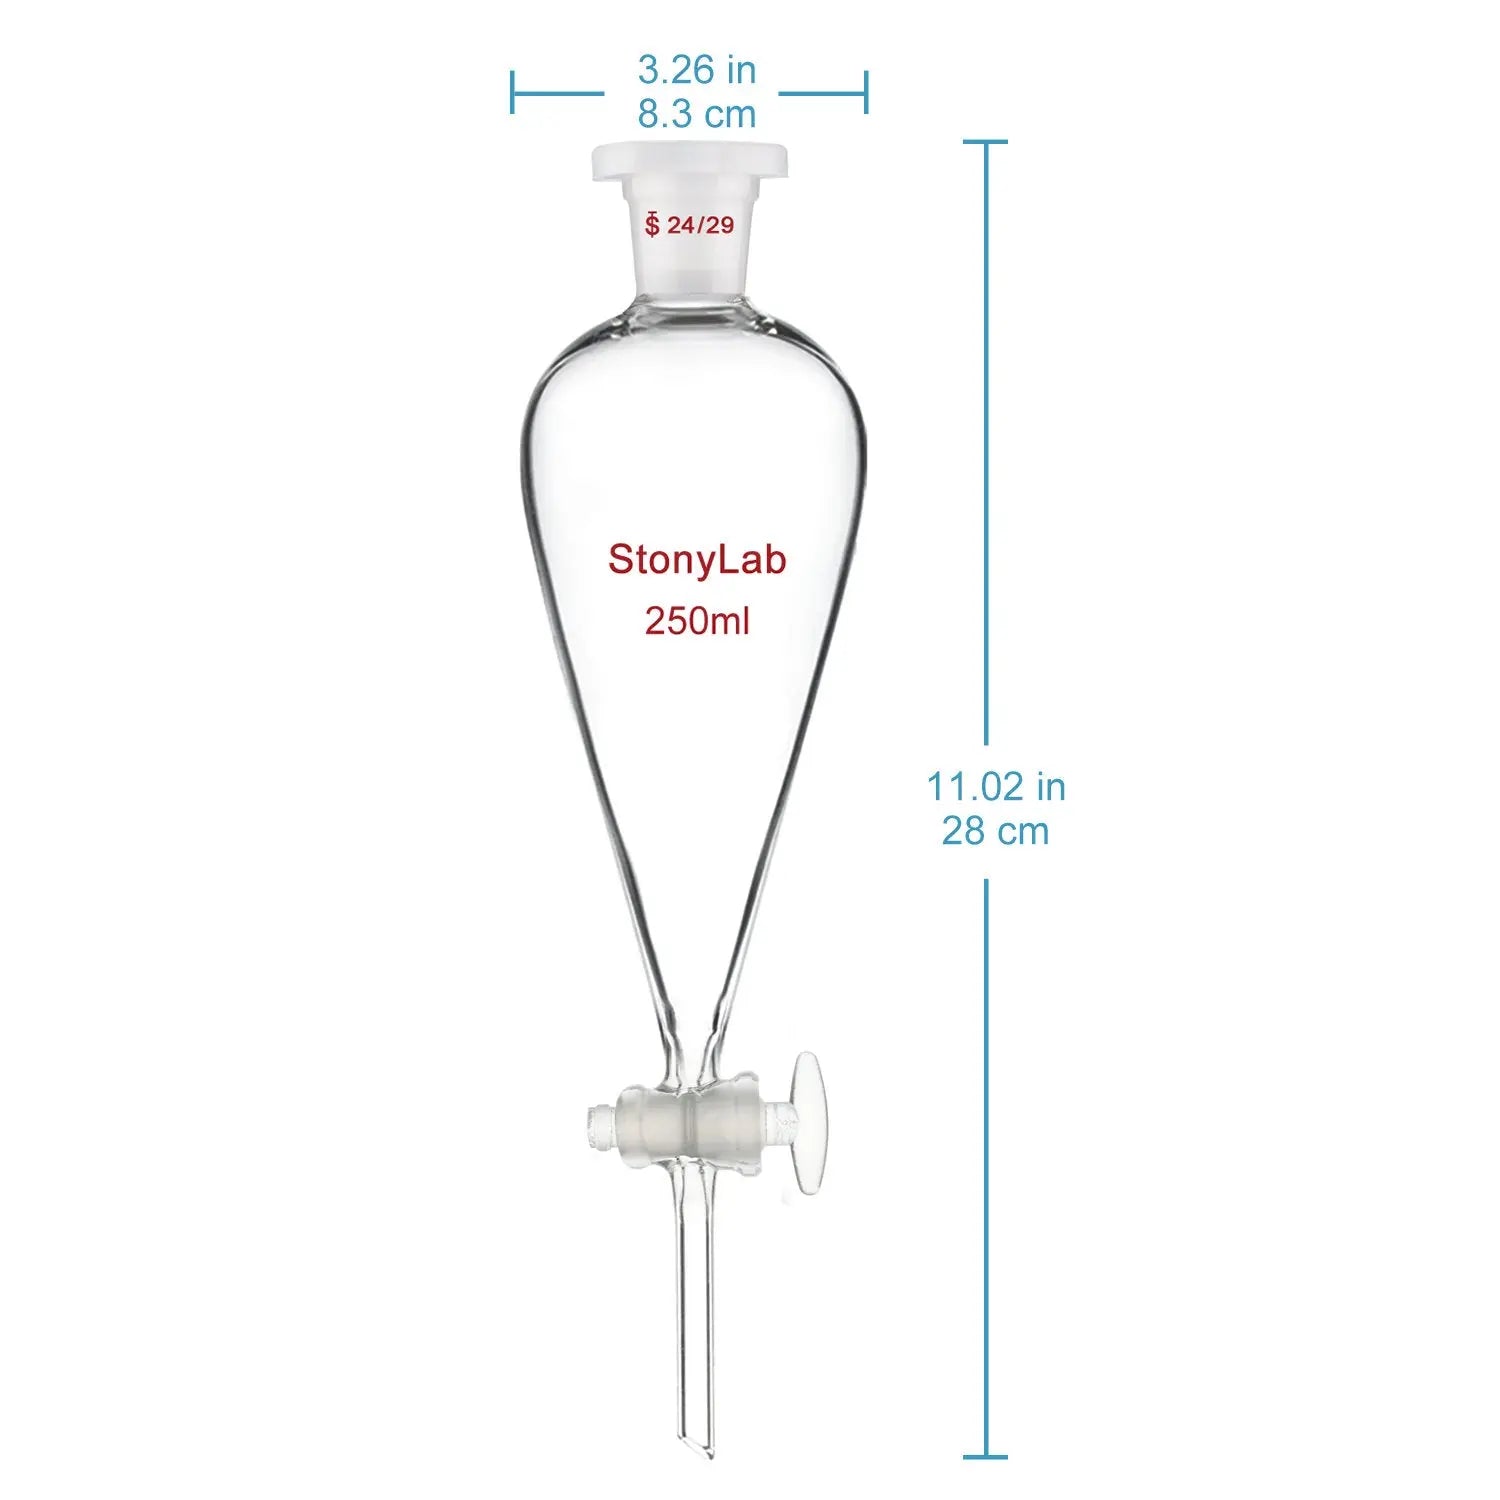 Separatory Funnel with Glass Stopcock Valve - StonyLab Separatory Funnels 